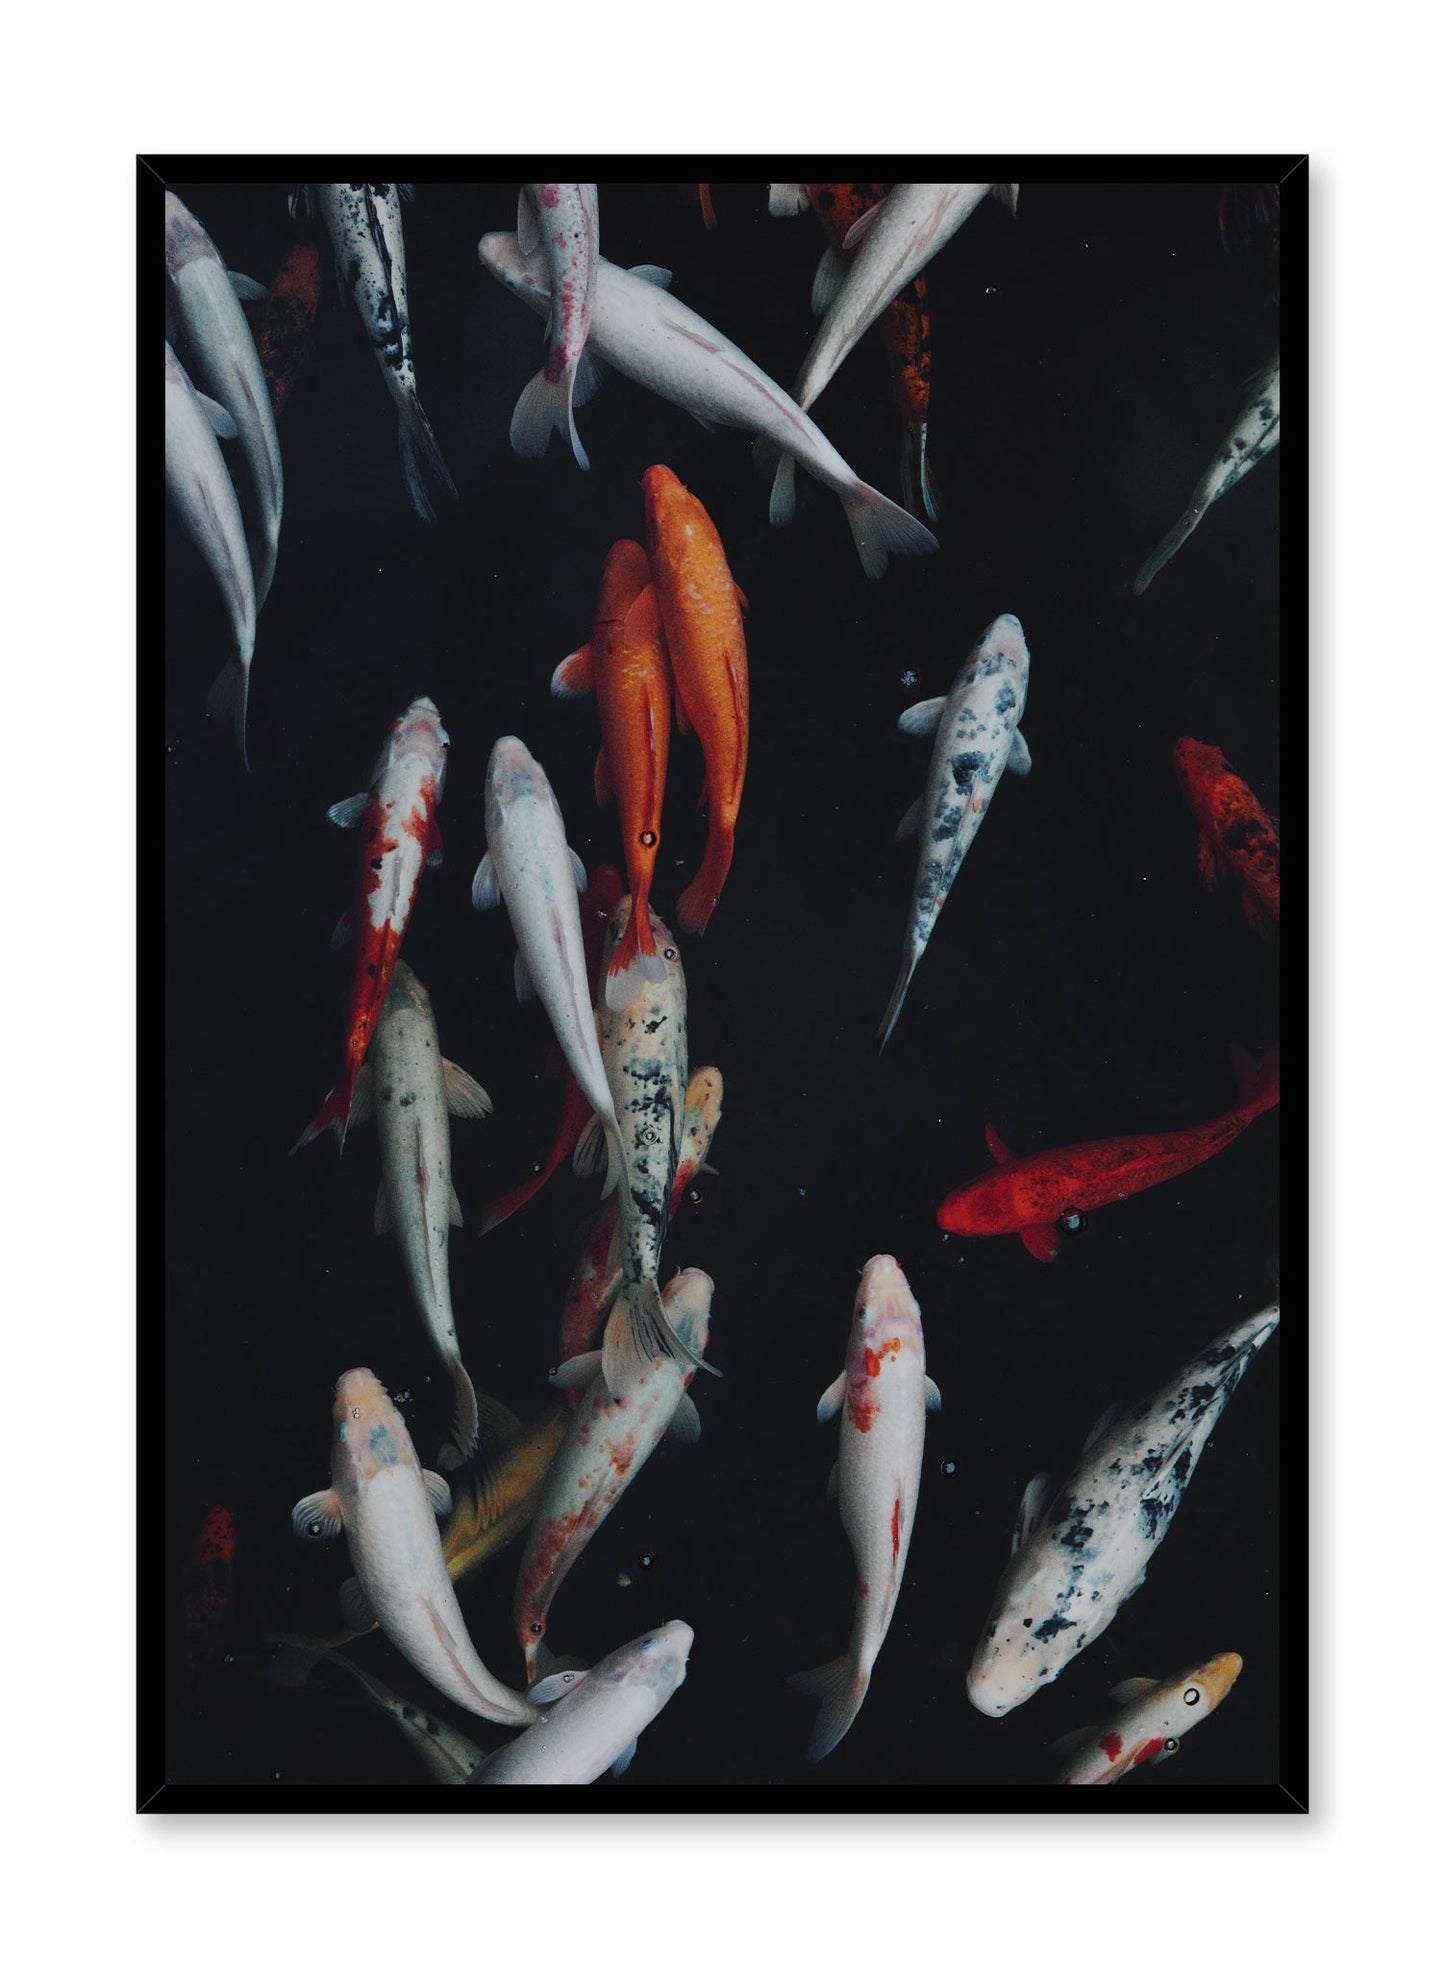 Koi Pond is a minimalist photography by Opposite Wall of the back view of many colourful koi fishes swimming in a pond.